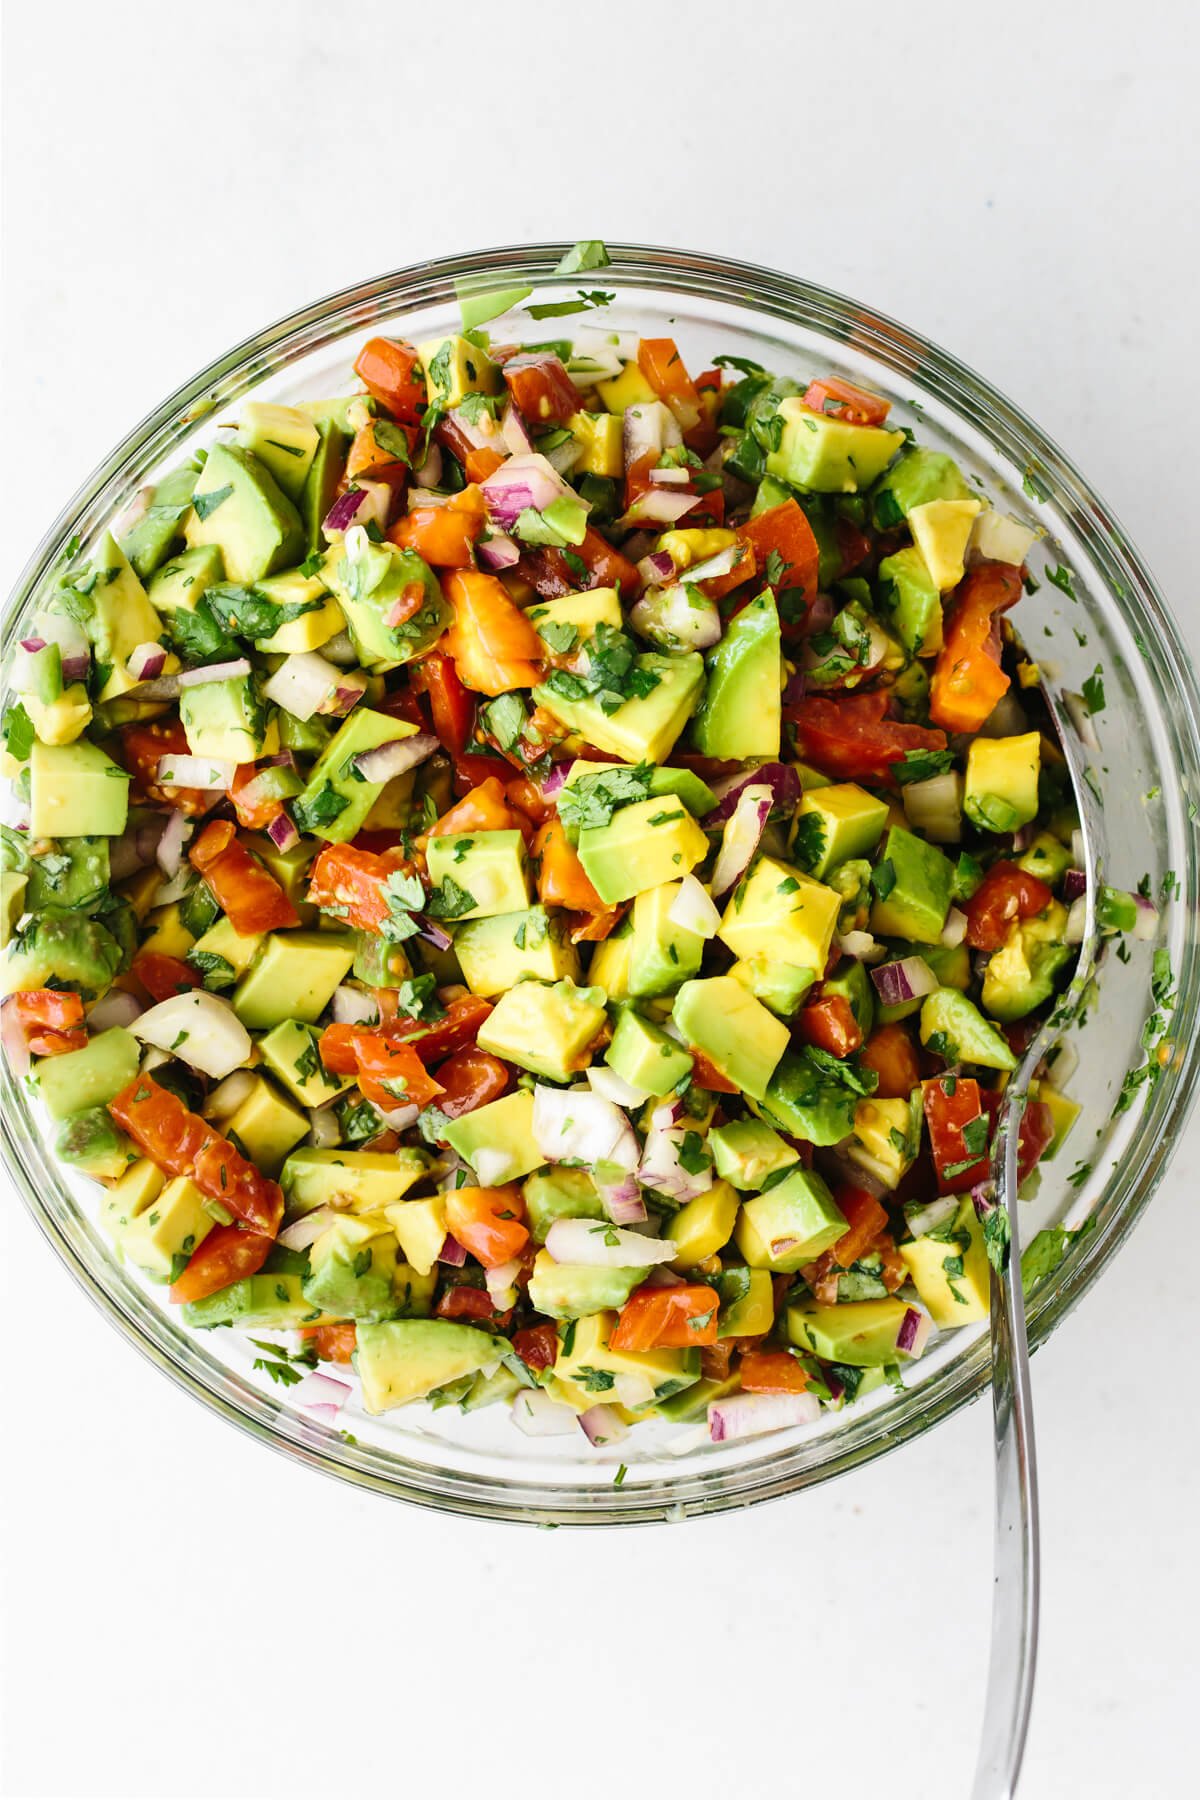 The avocado salsa ingredients stirred and mixed together in a bowl.